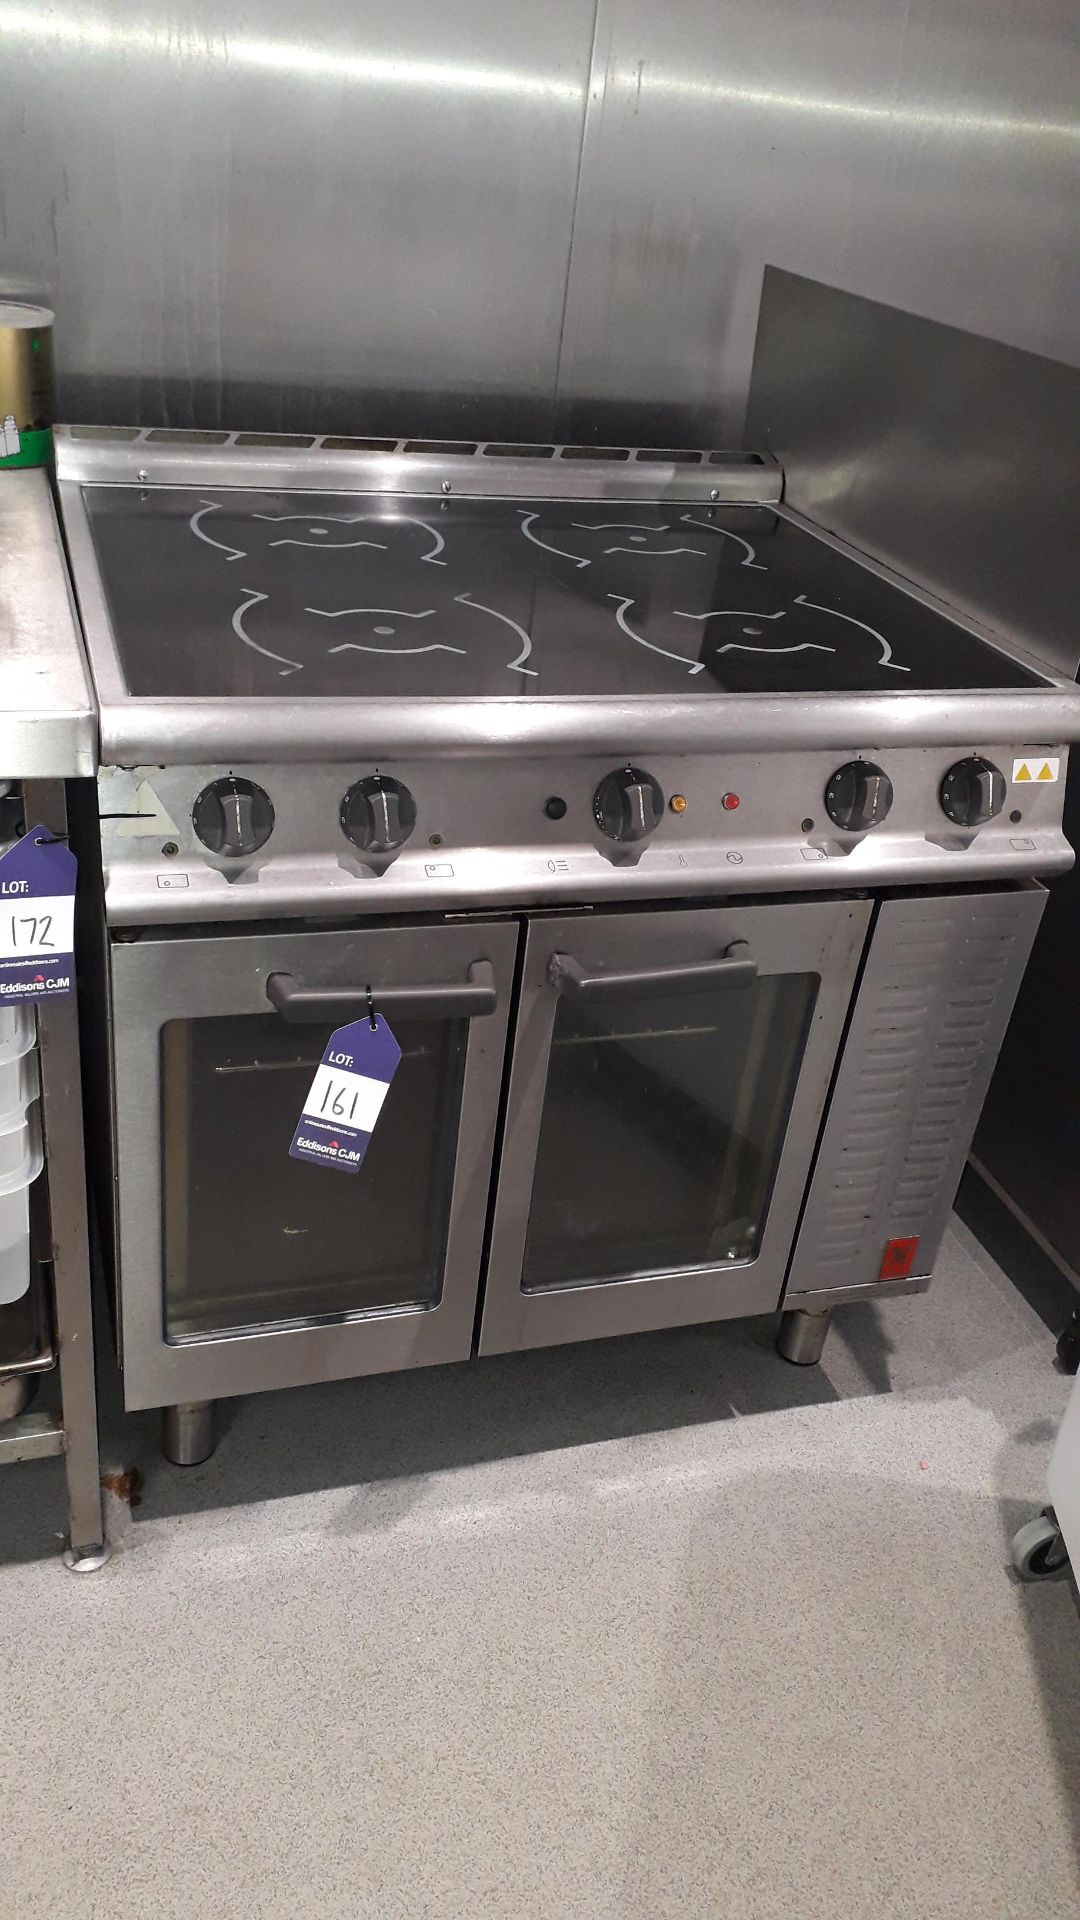 Falcon E3913i Dominator Plus Induction Oven Serial Number F592512 415v, Located at First Floor,